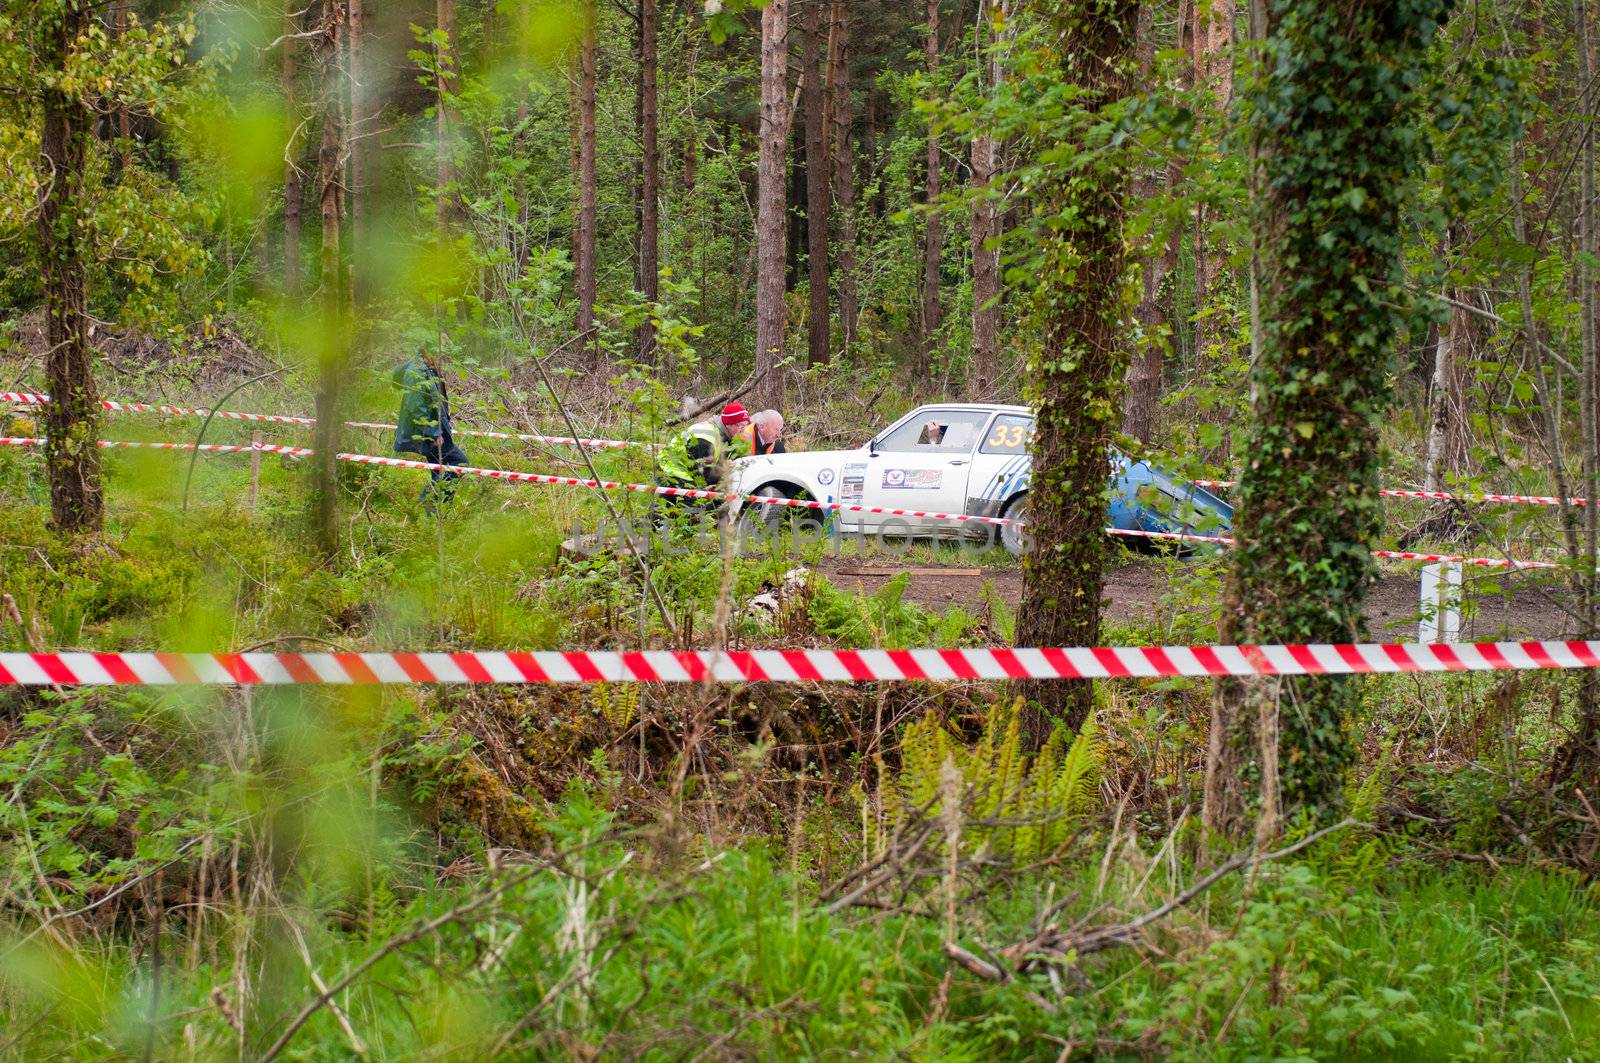 MALLOW, IRELAND - MAY 19: S. Benskin off road on Ford Escort at the Jim Walsh Cork Forest Rally on May 19, 2012 in Mallow, Ireland. 4th round of the Valvoline National Forest Rally Championship.